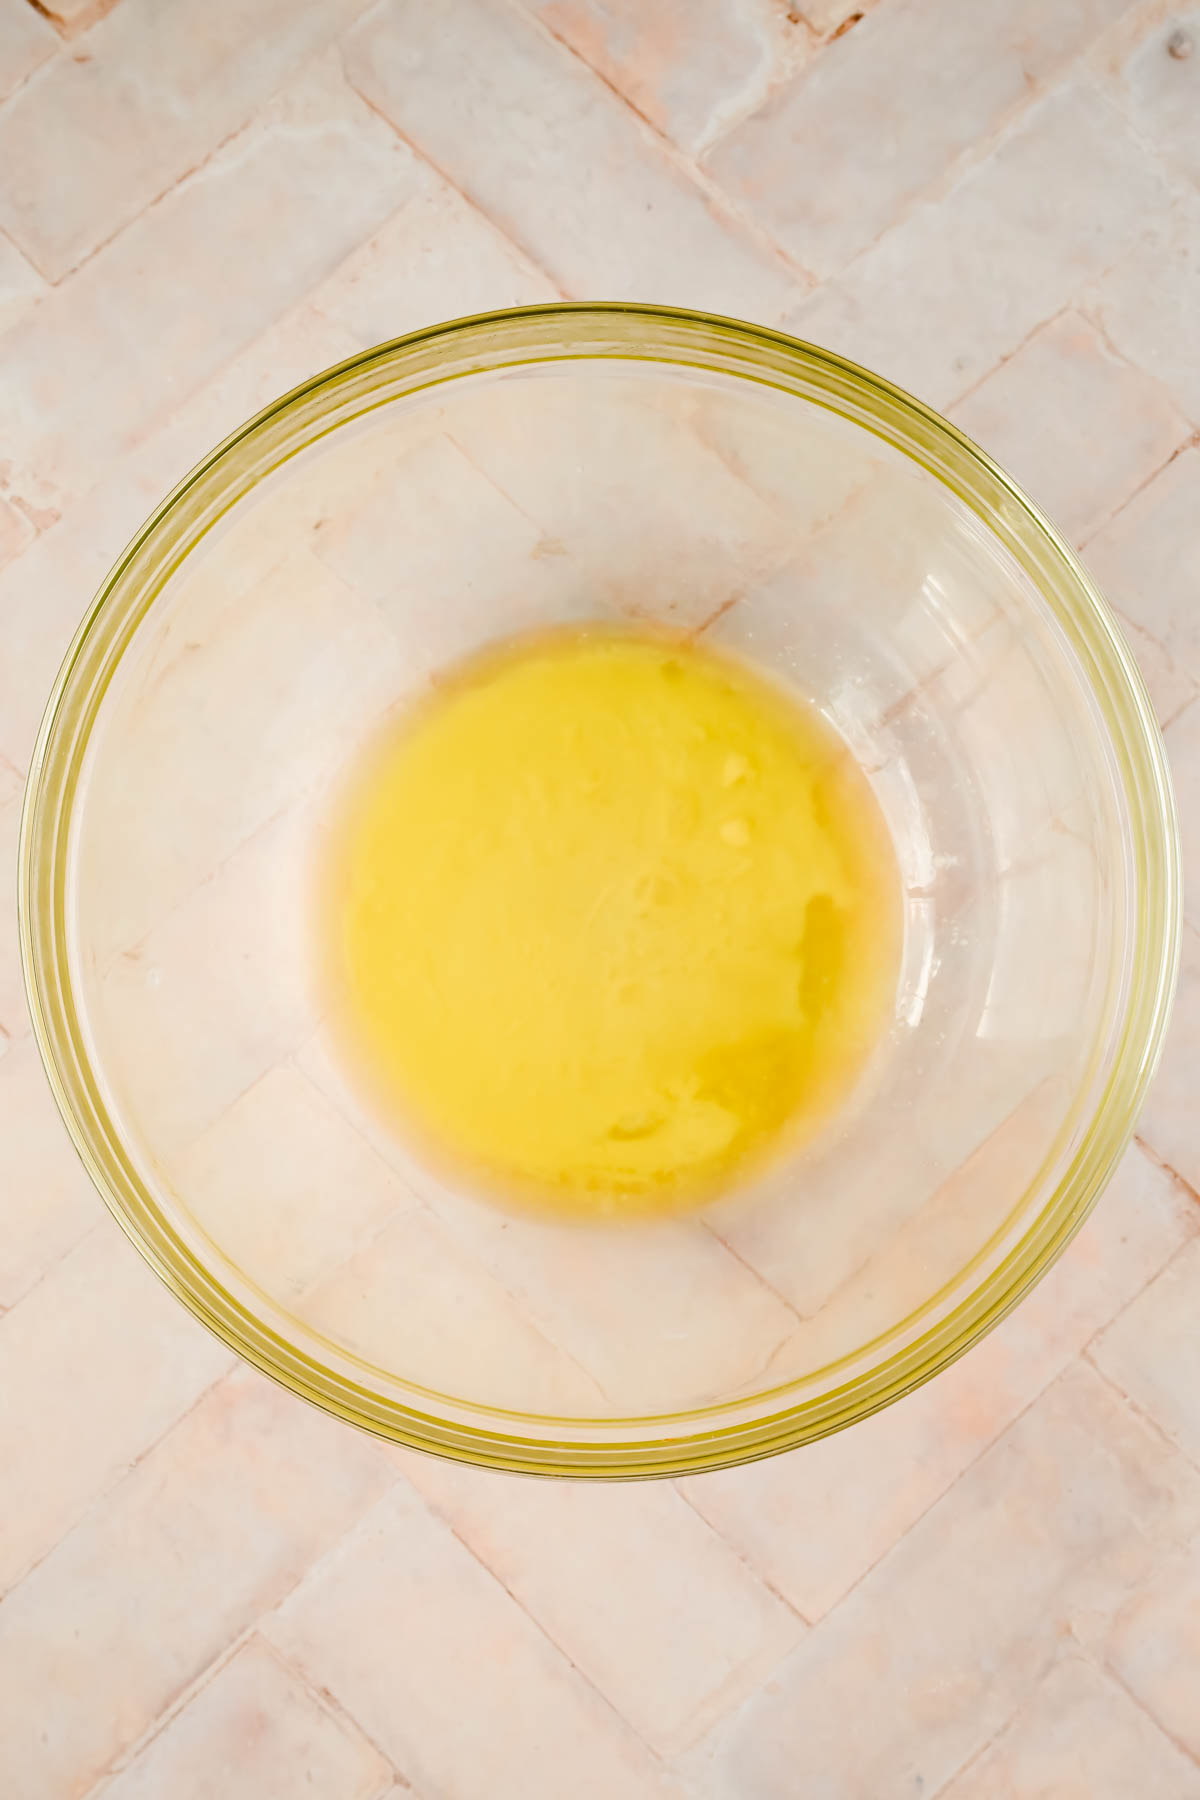 melted butter in glass mixing bowl.